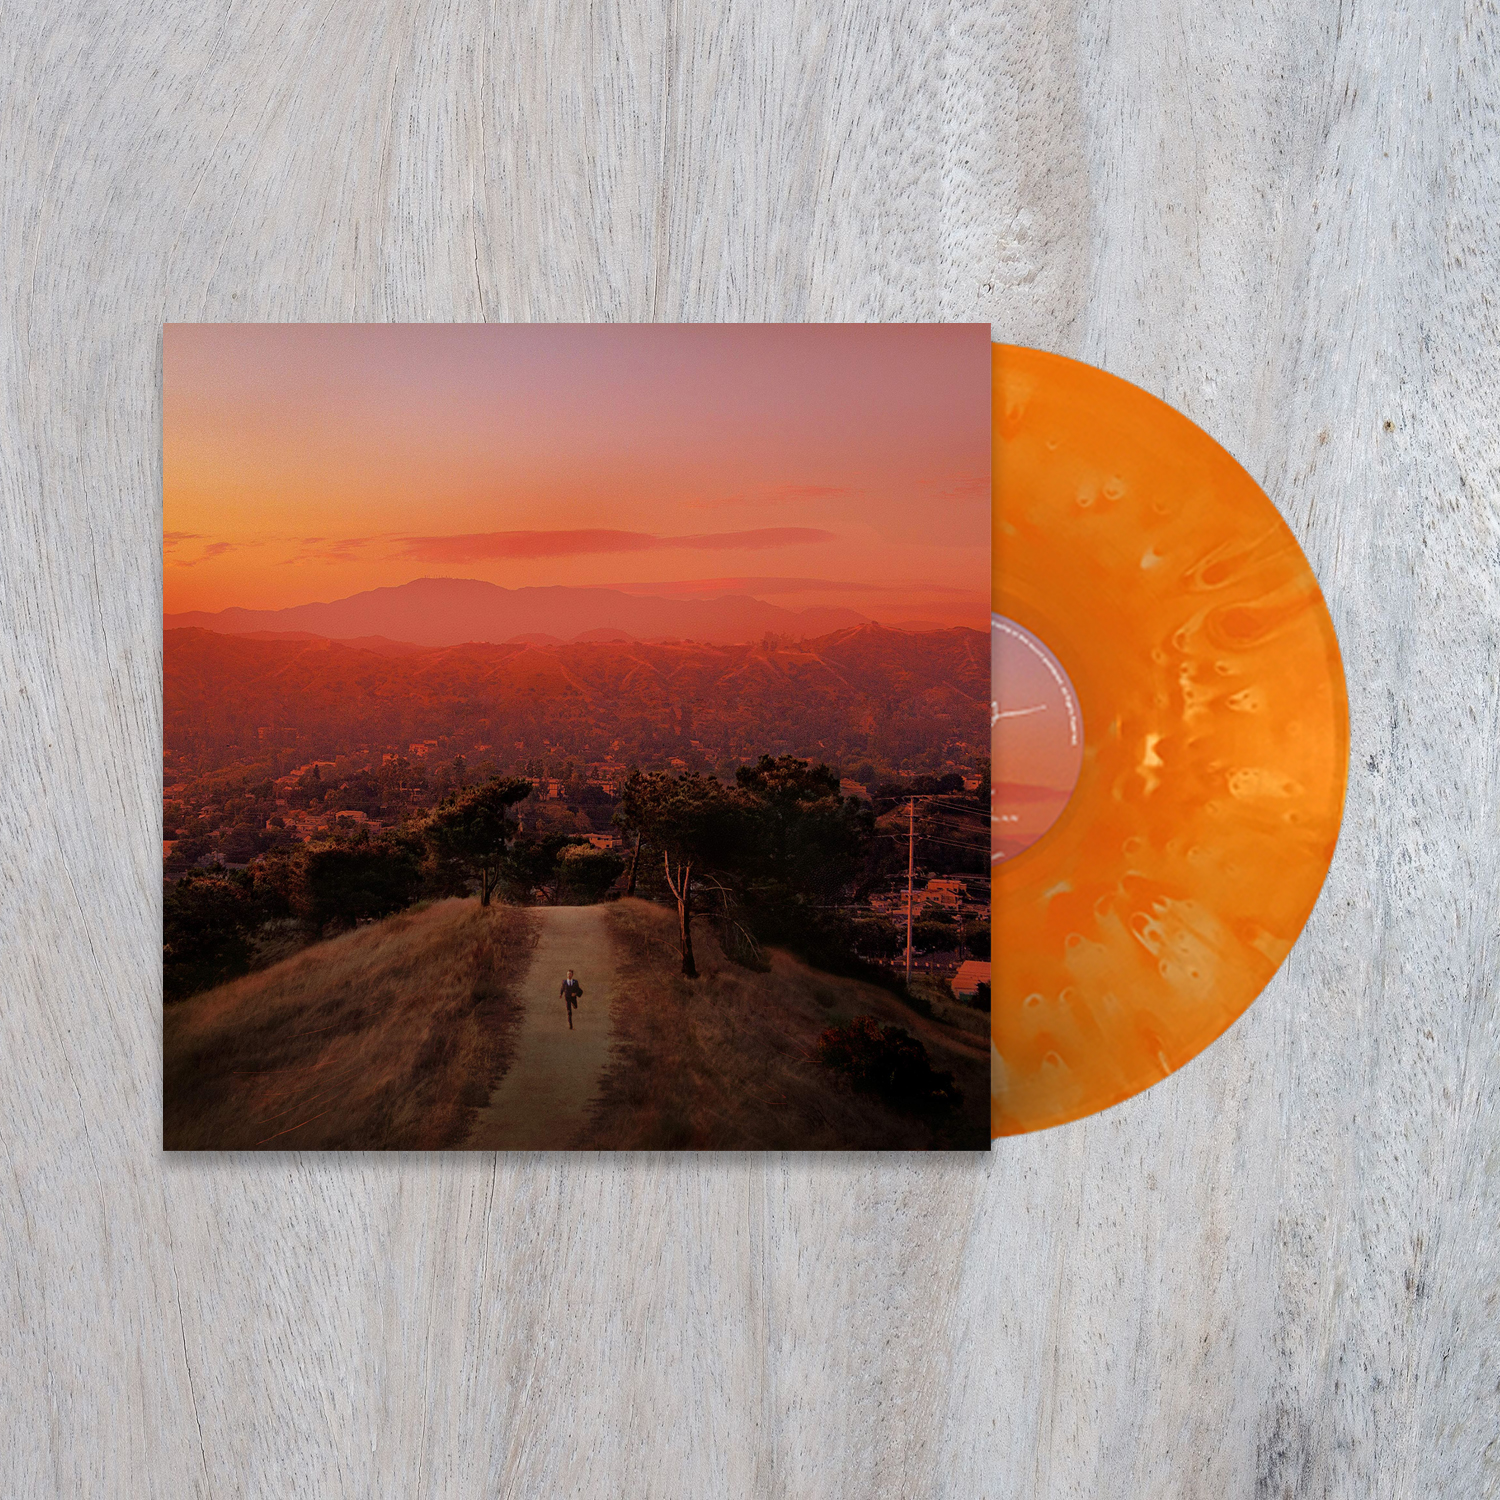 tykkelse Rafflesia Arnoldi Lure RL Records on Twitter: "SEALED Finneas Blood Harmony Cloudy Orange /300  RARE SOLD OUT VINYL https://t.co/pfGx9MPcQJ https://t.co/8cIBNgKmUO" /  Twitter